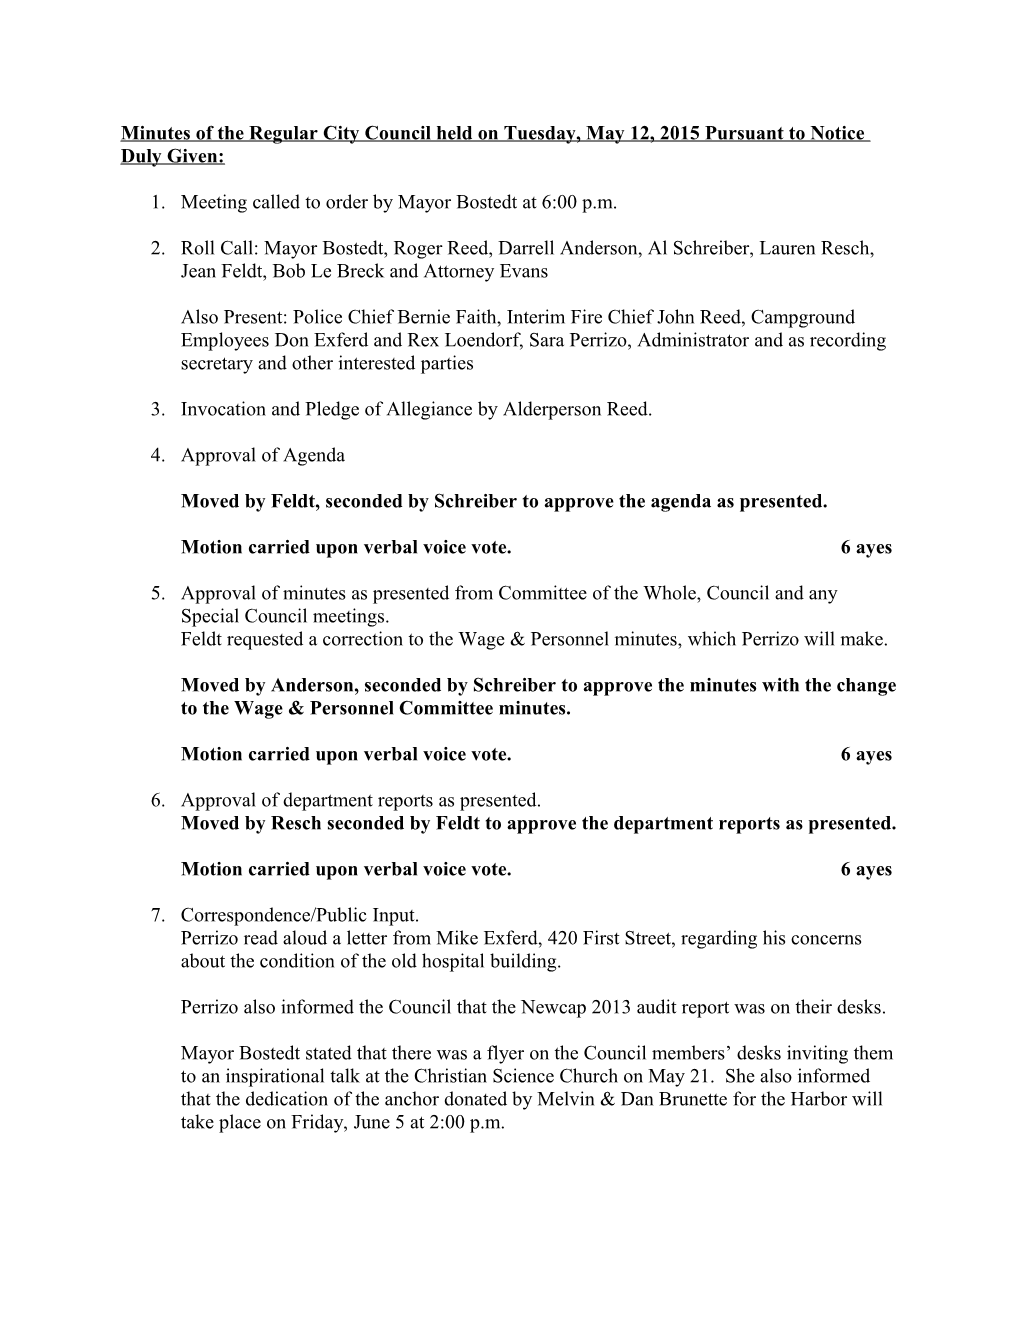 Minutes of the Regularcity Council Held on Tuesday, May 12, 2015 Pursuant to Notice Duly